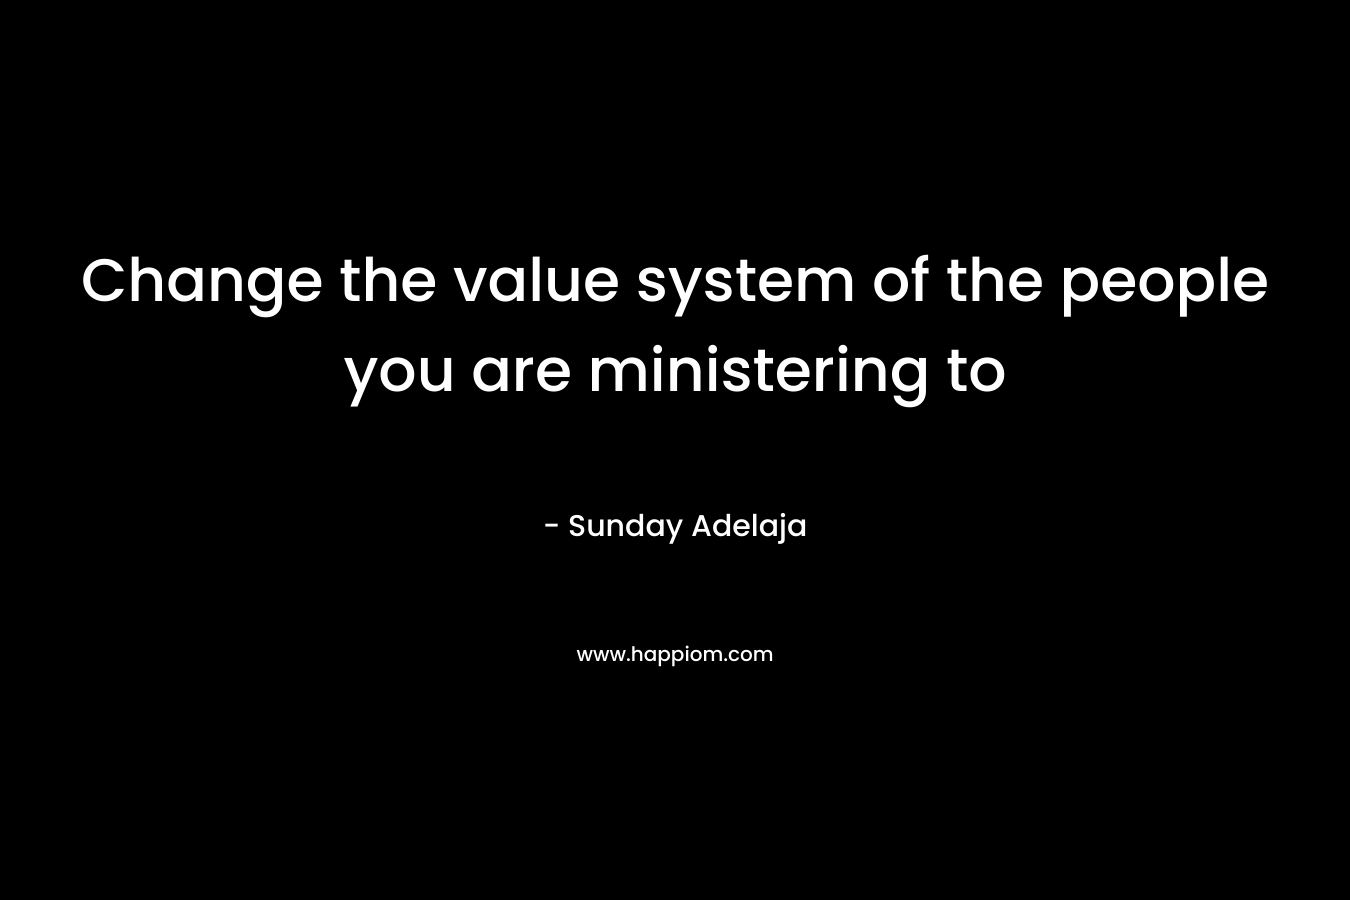 Change the value system of the people you are ministering to